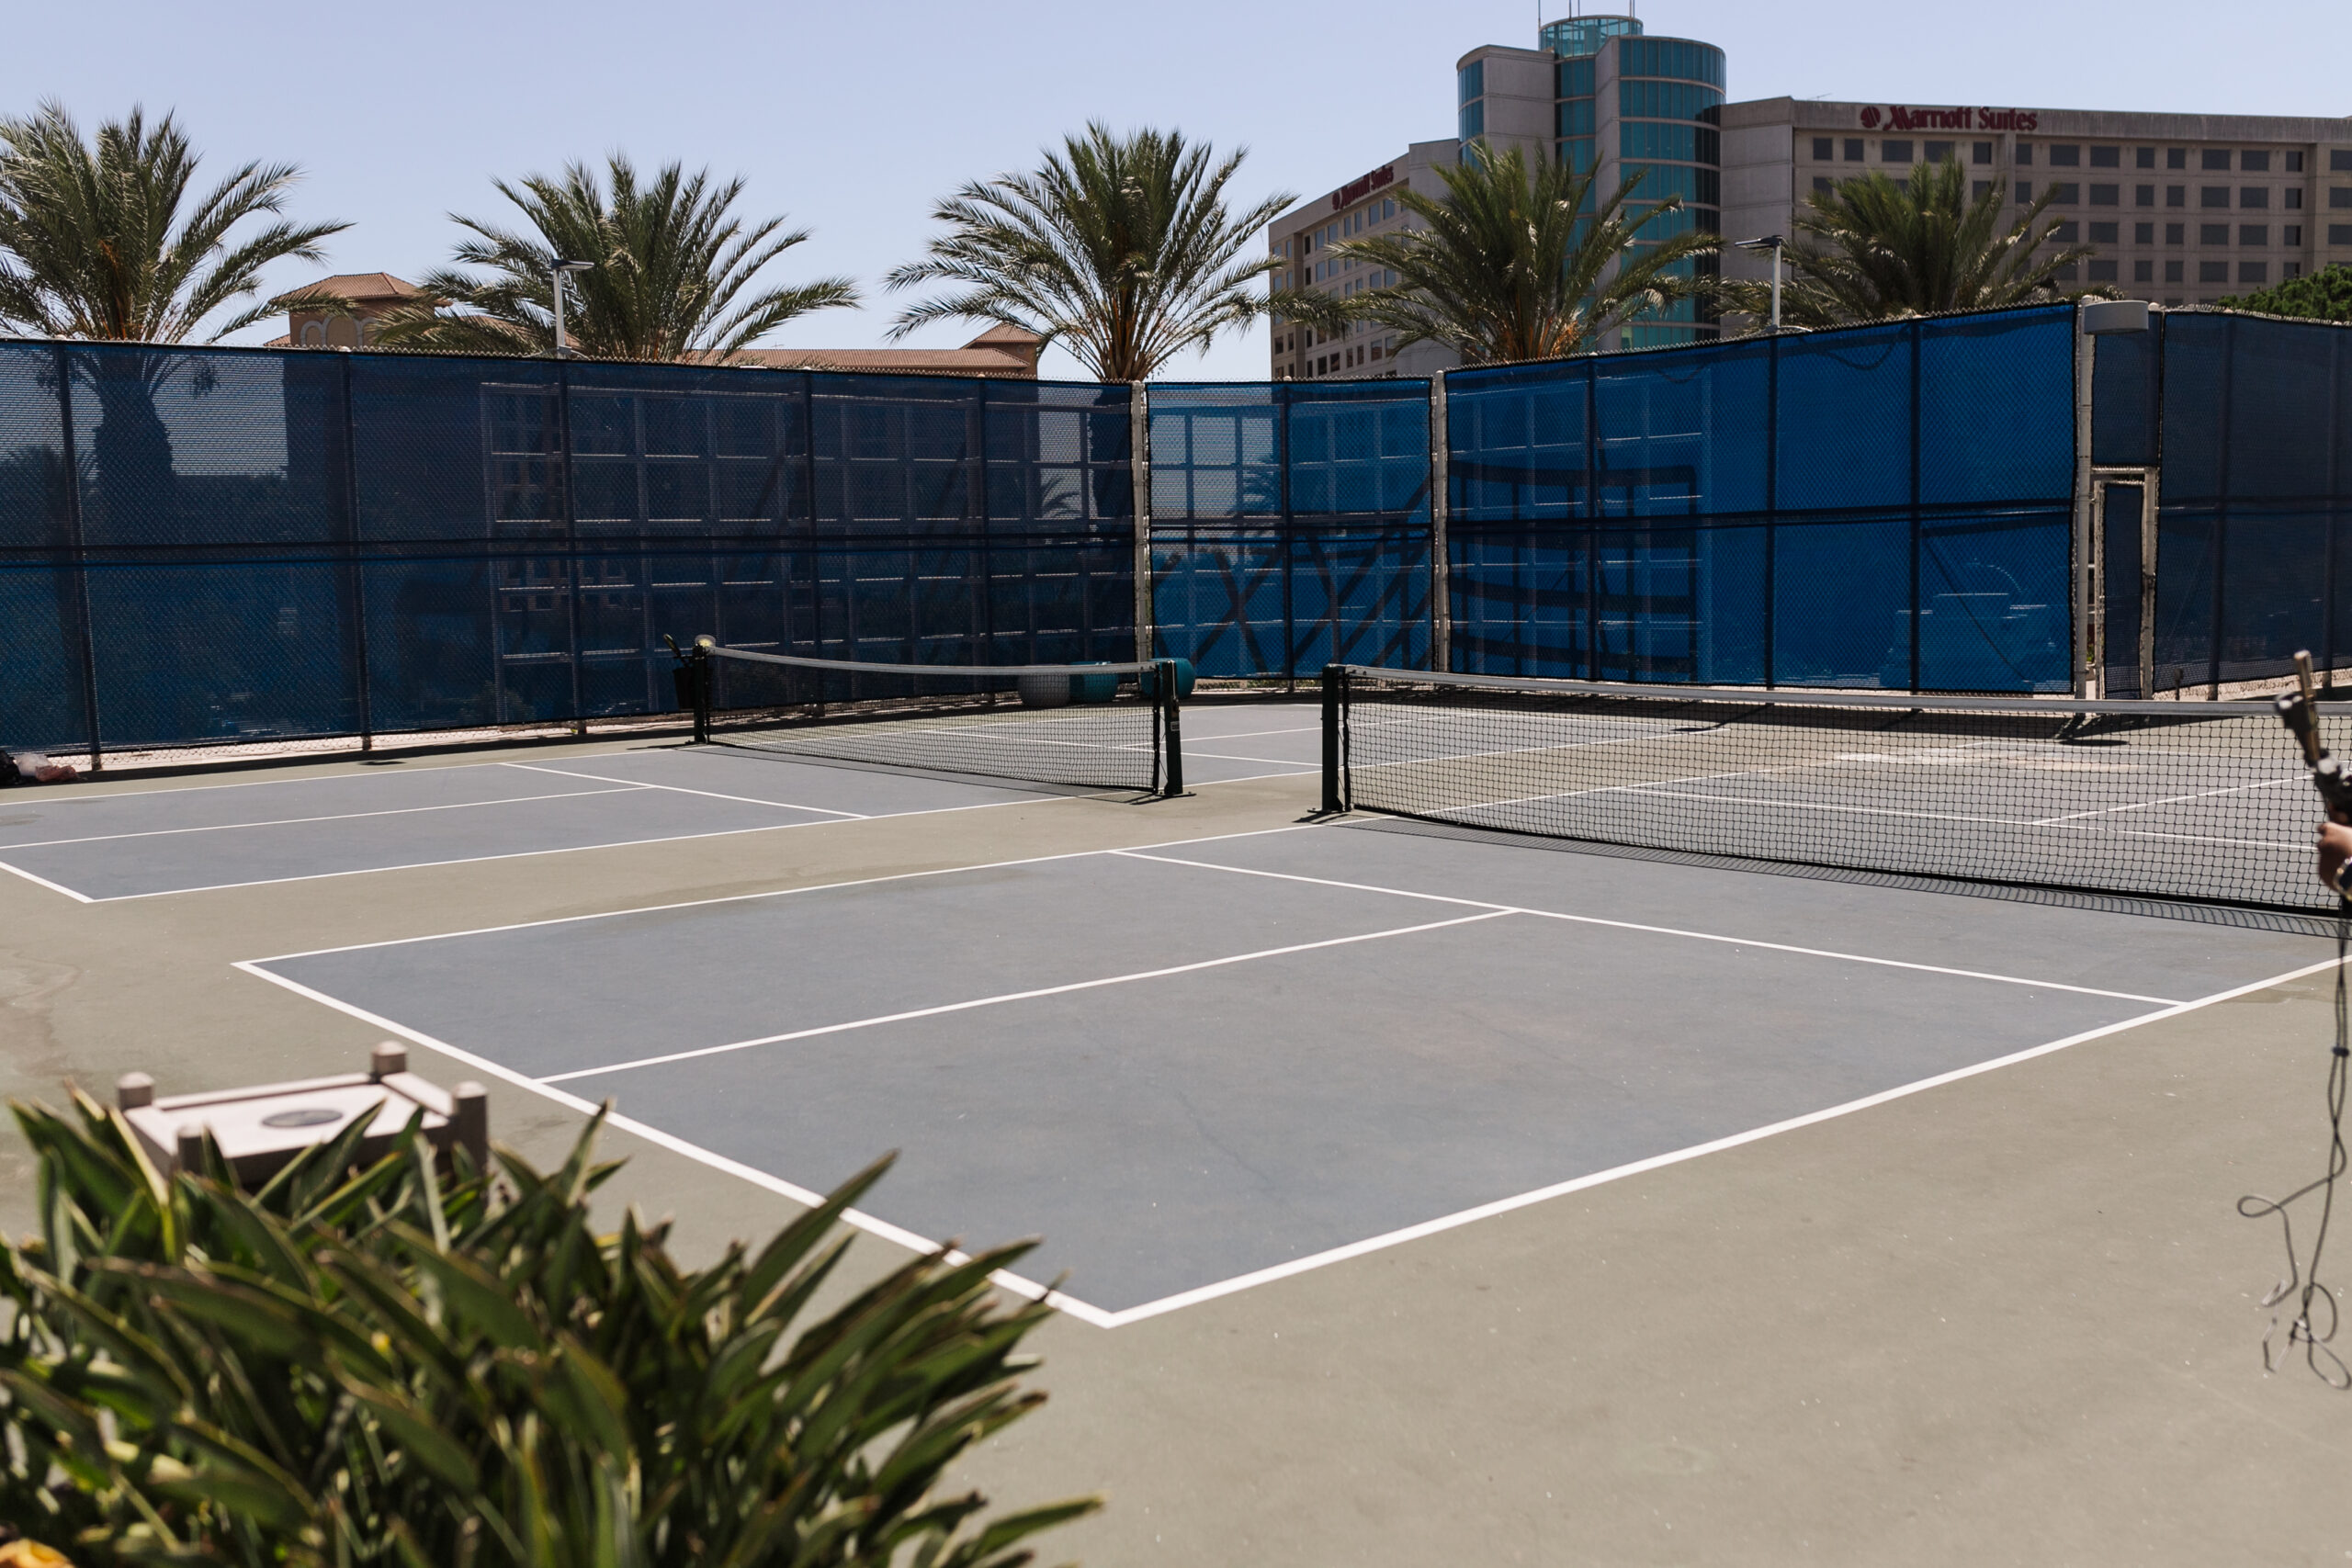 a unique feature at the Hyatt Regency is this sport court with multiple games available for guests